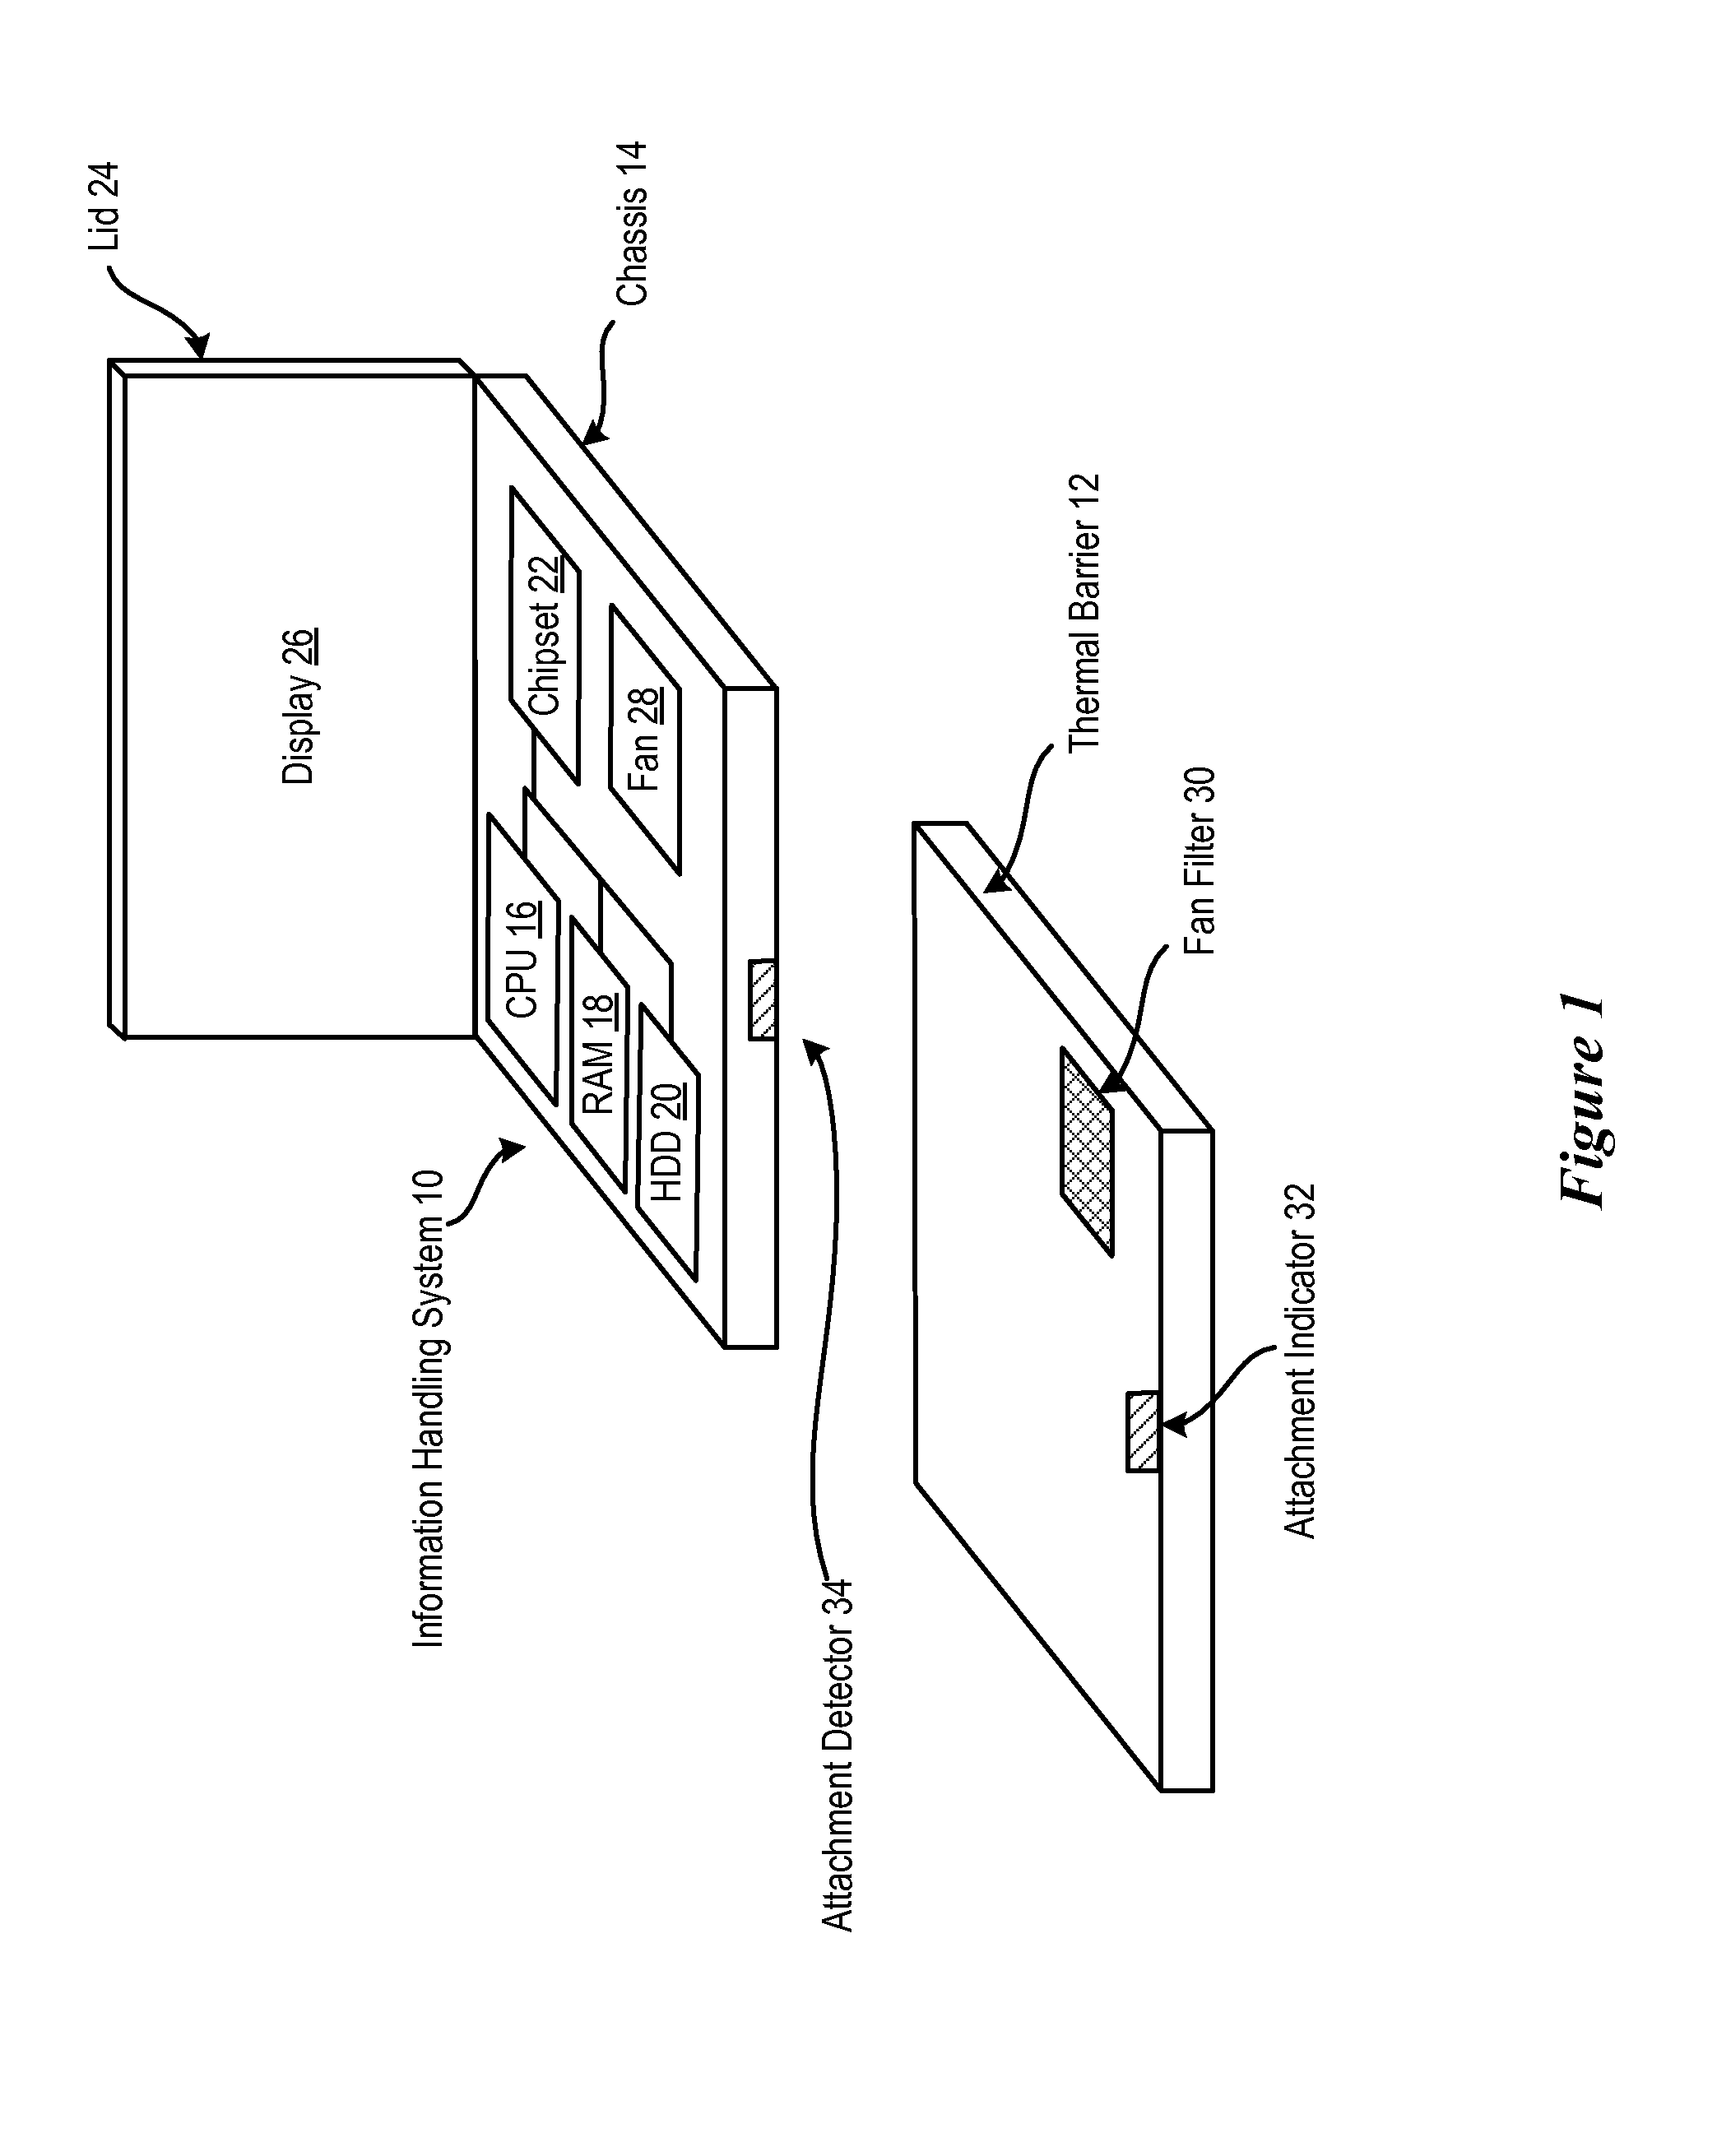 System and method for portable information handling system parallel-wall thermal shield